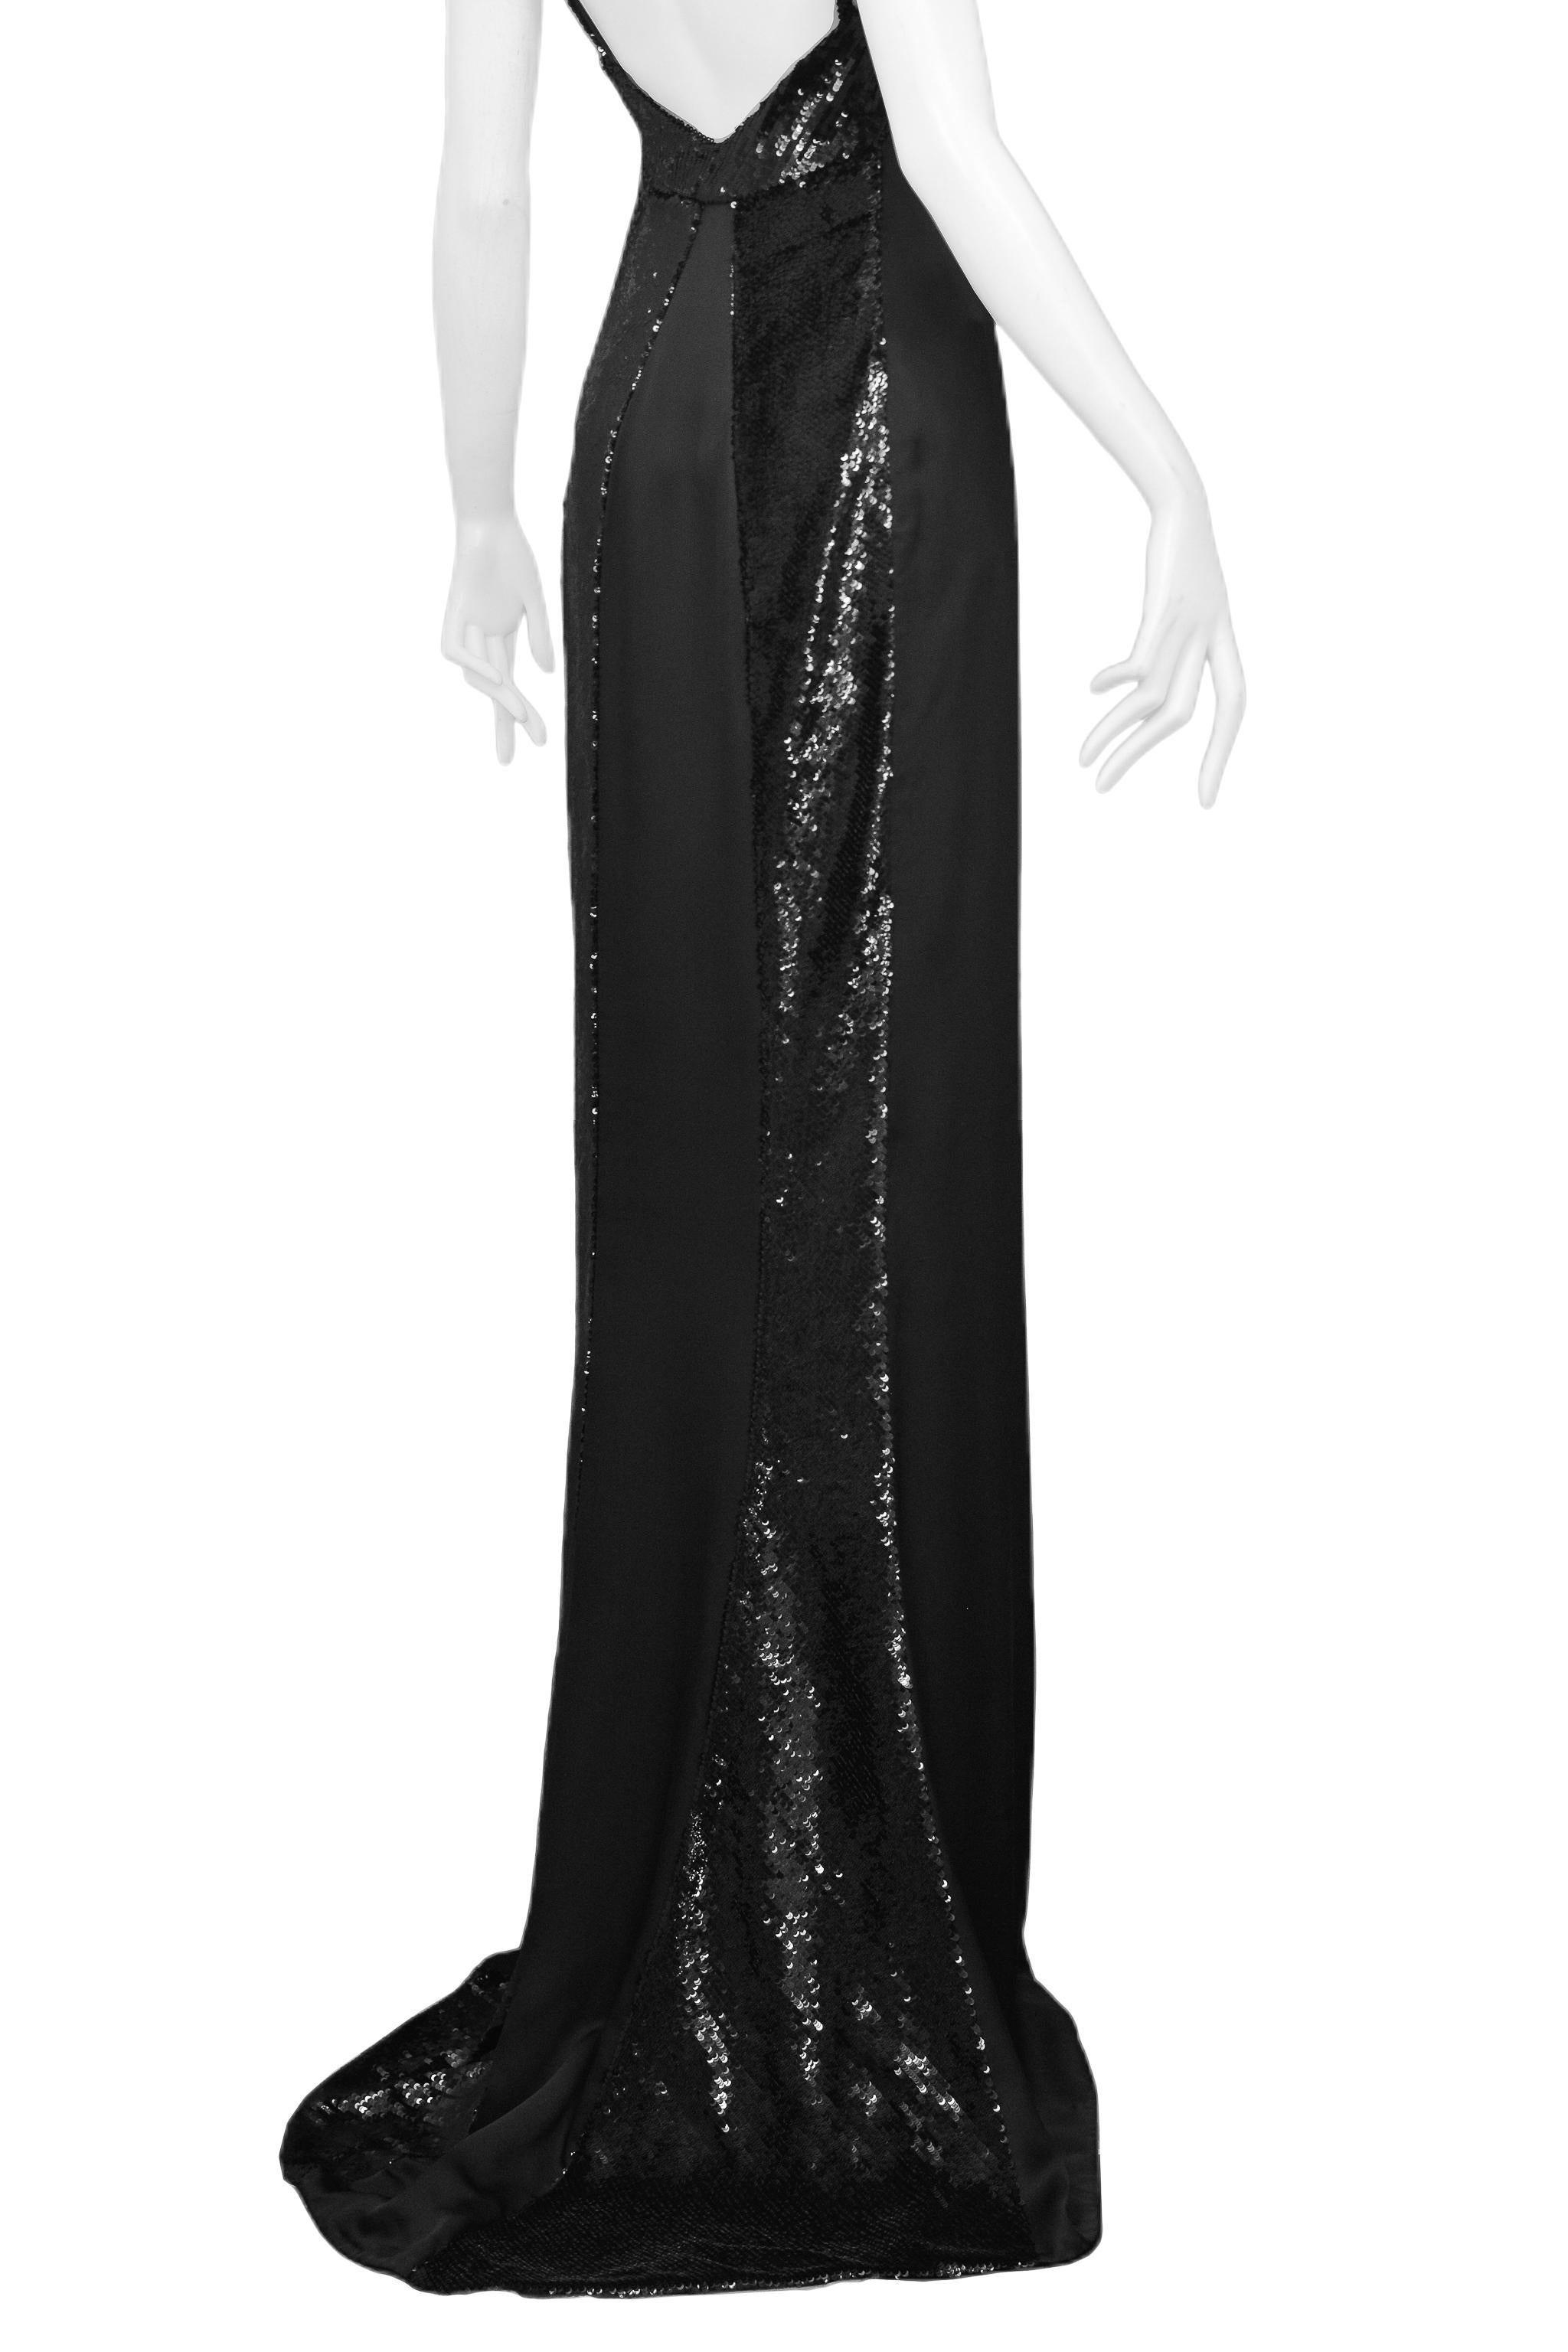 tom ford black gown